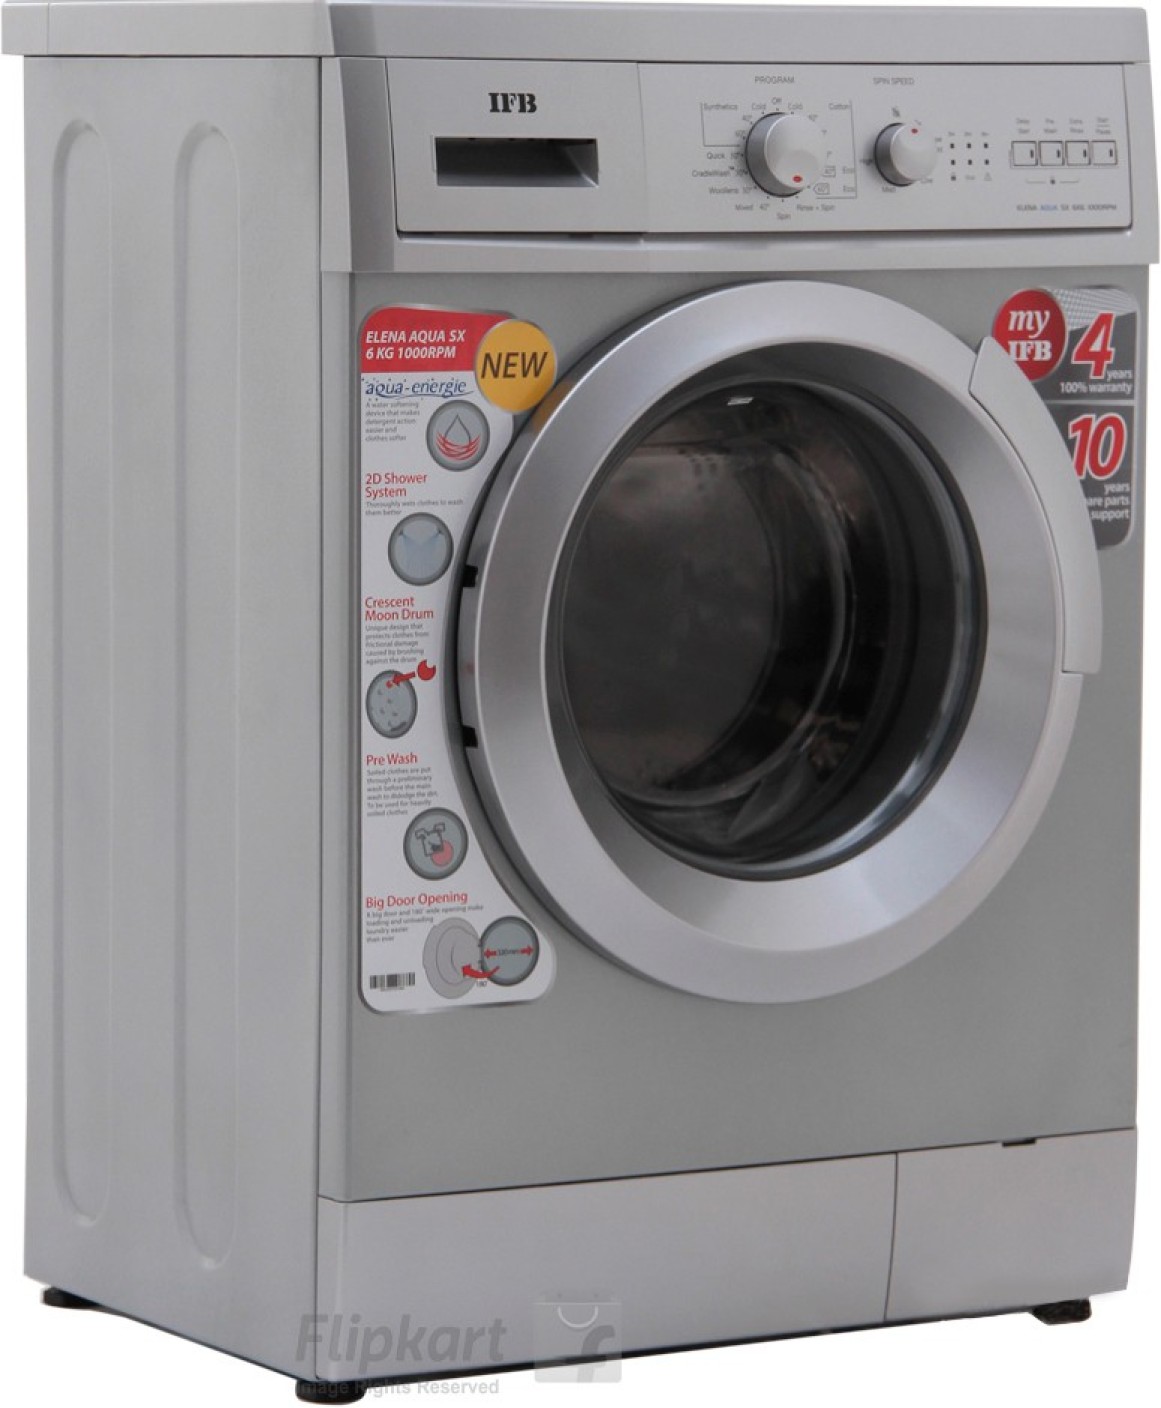 Ifb 6 Kg Fully Automatic Front Load Washing Machine Silver